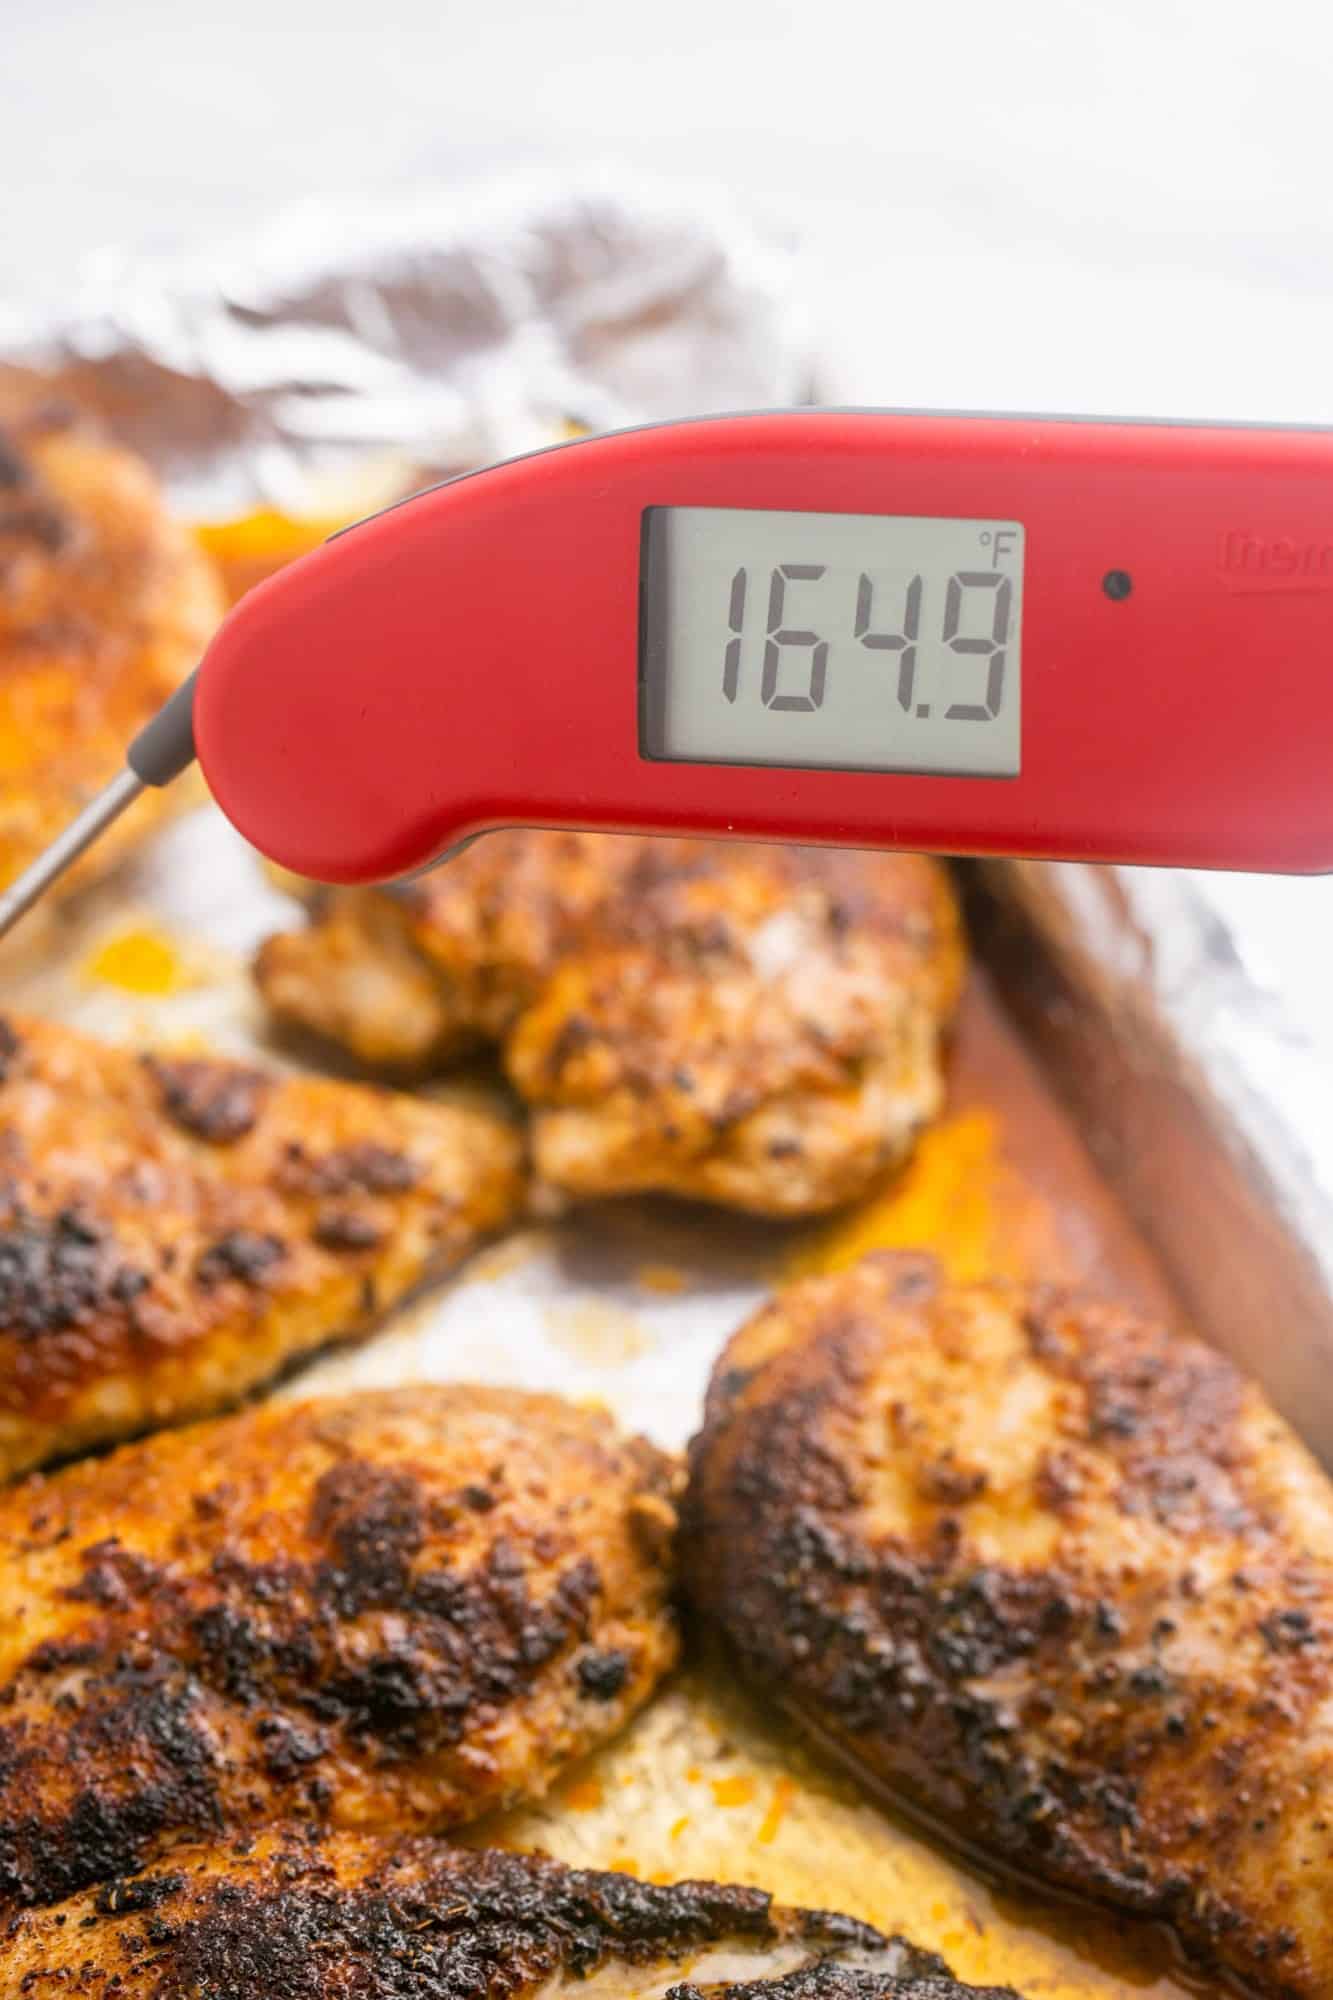 Temping blackened chicken showing the internal temperature at 165F